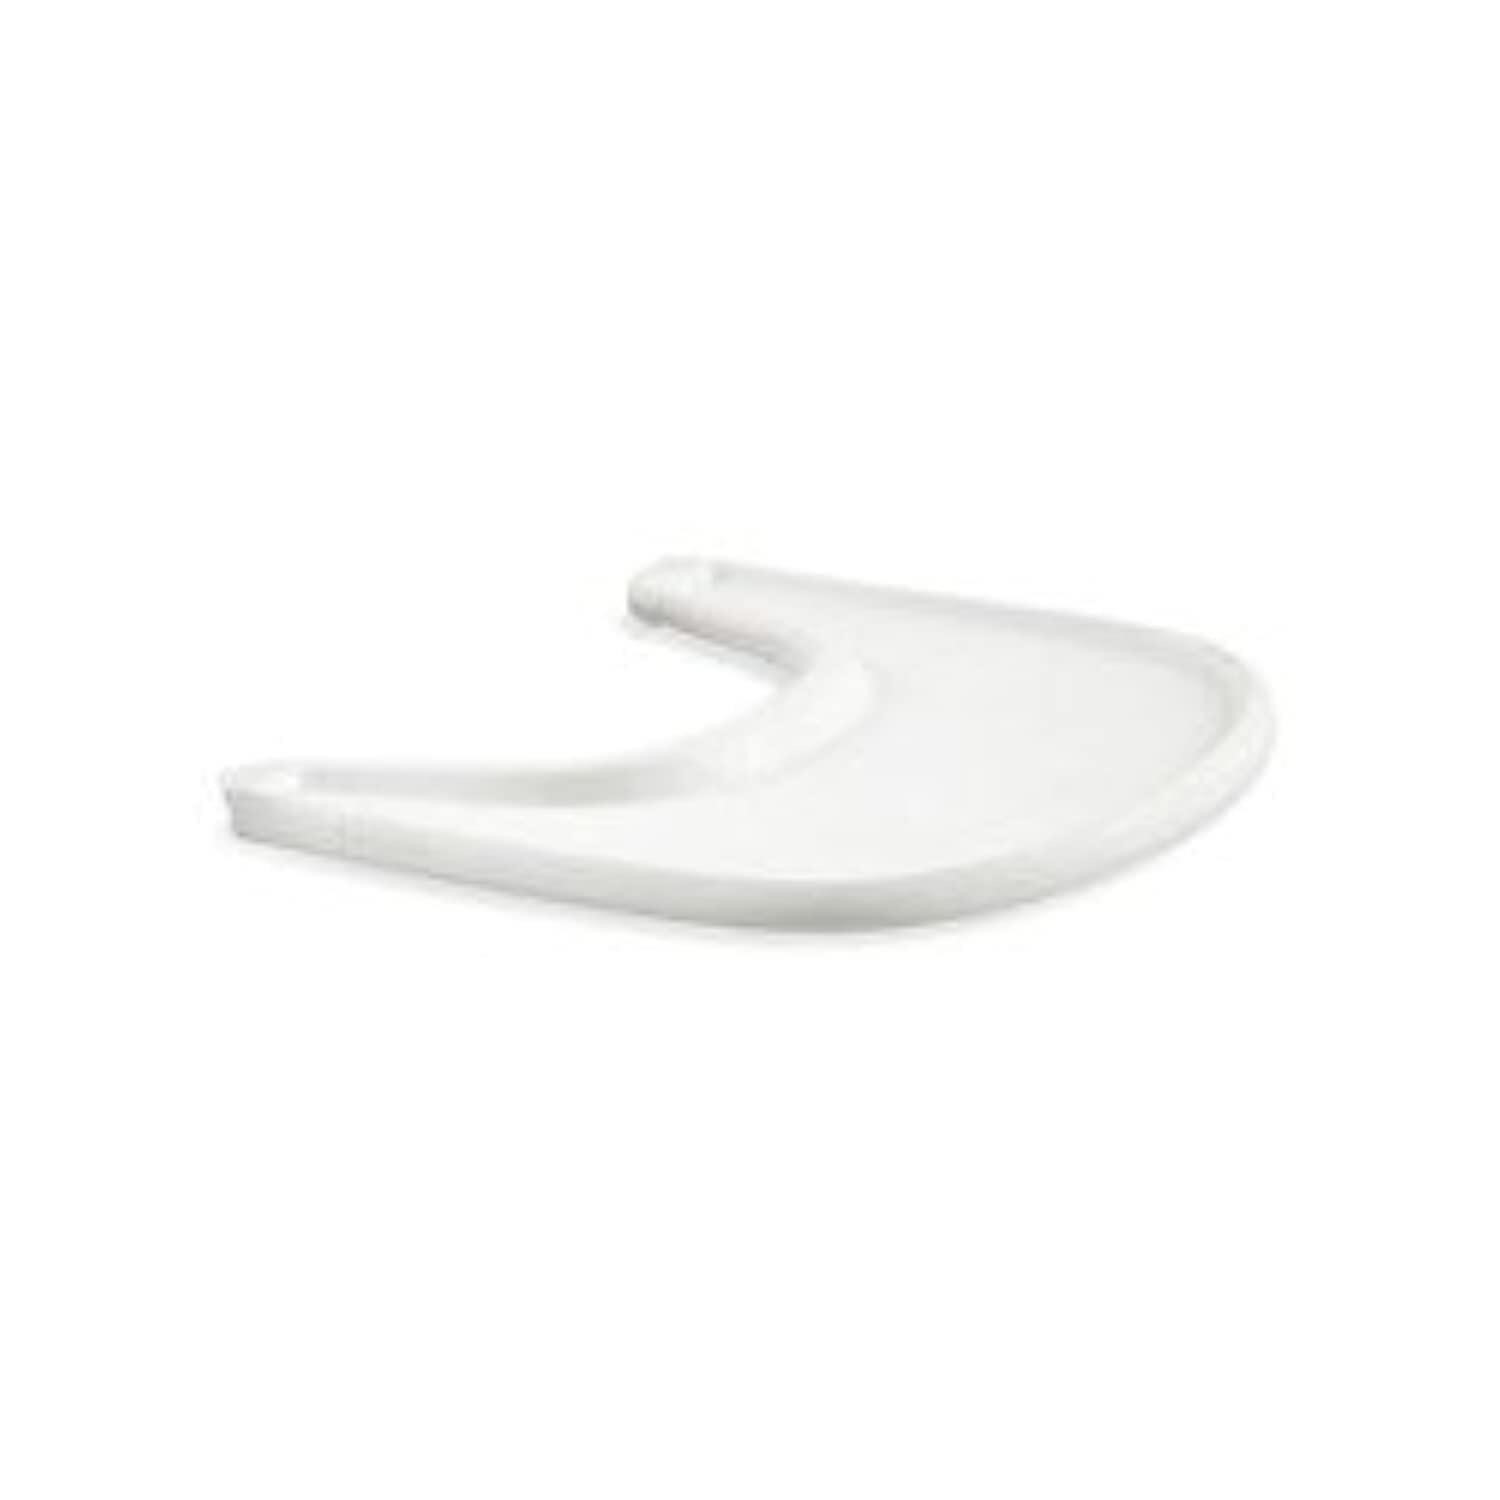 Stokke Tray, White - Designed Exclusively for Trip